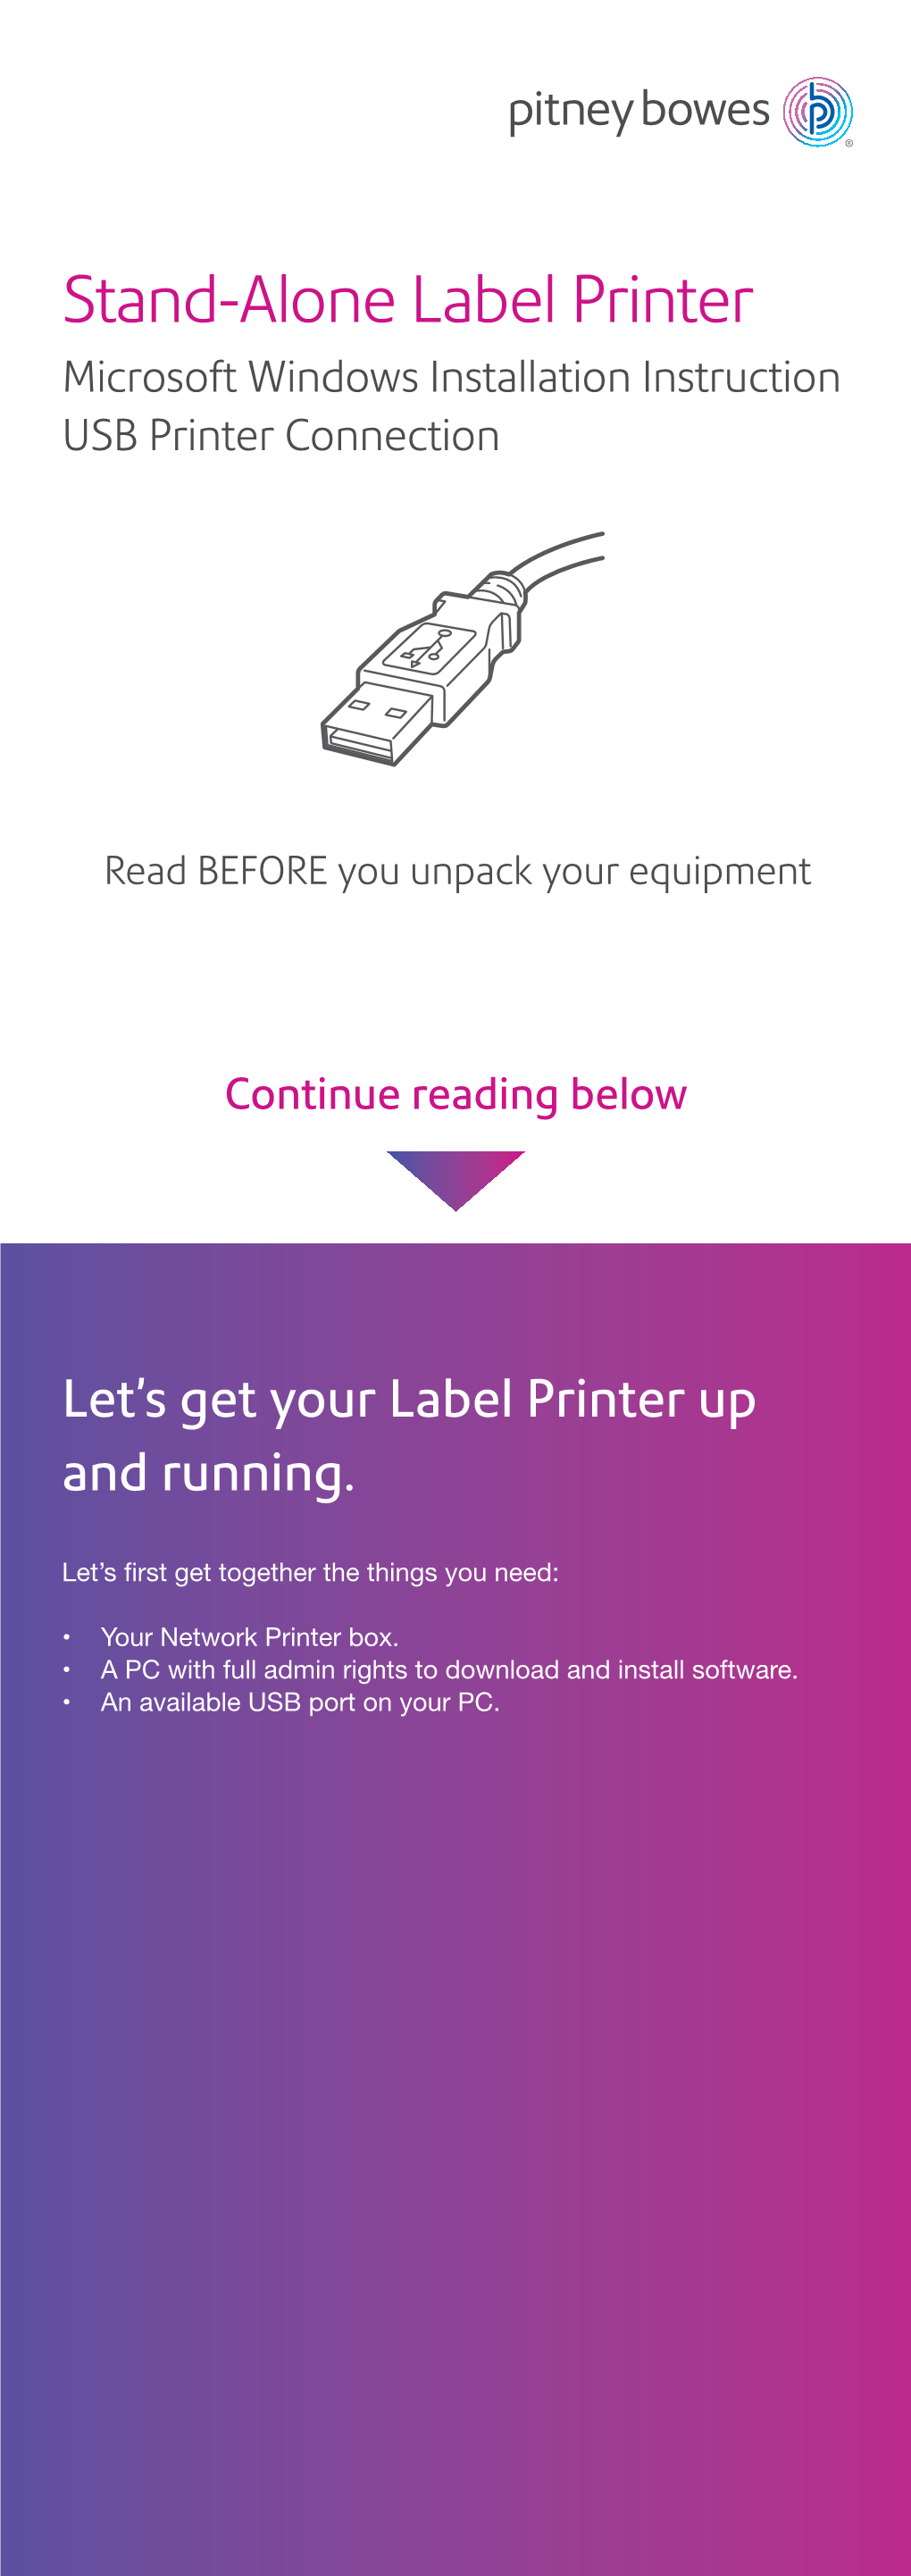 SP-100 Stand-Alone Label Printer Installation Instructions